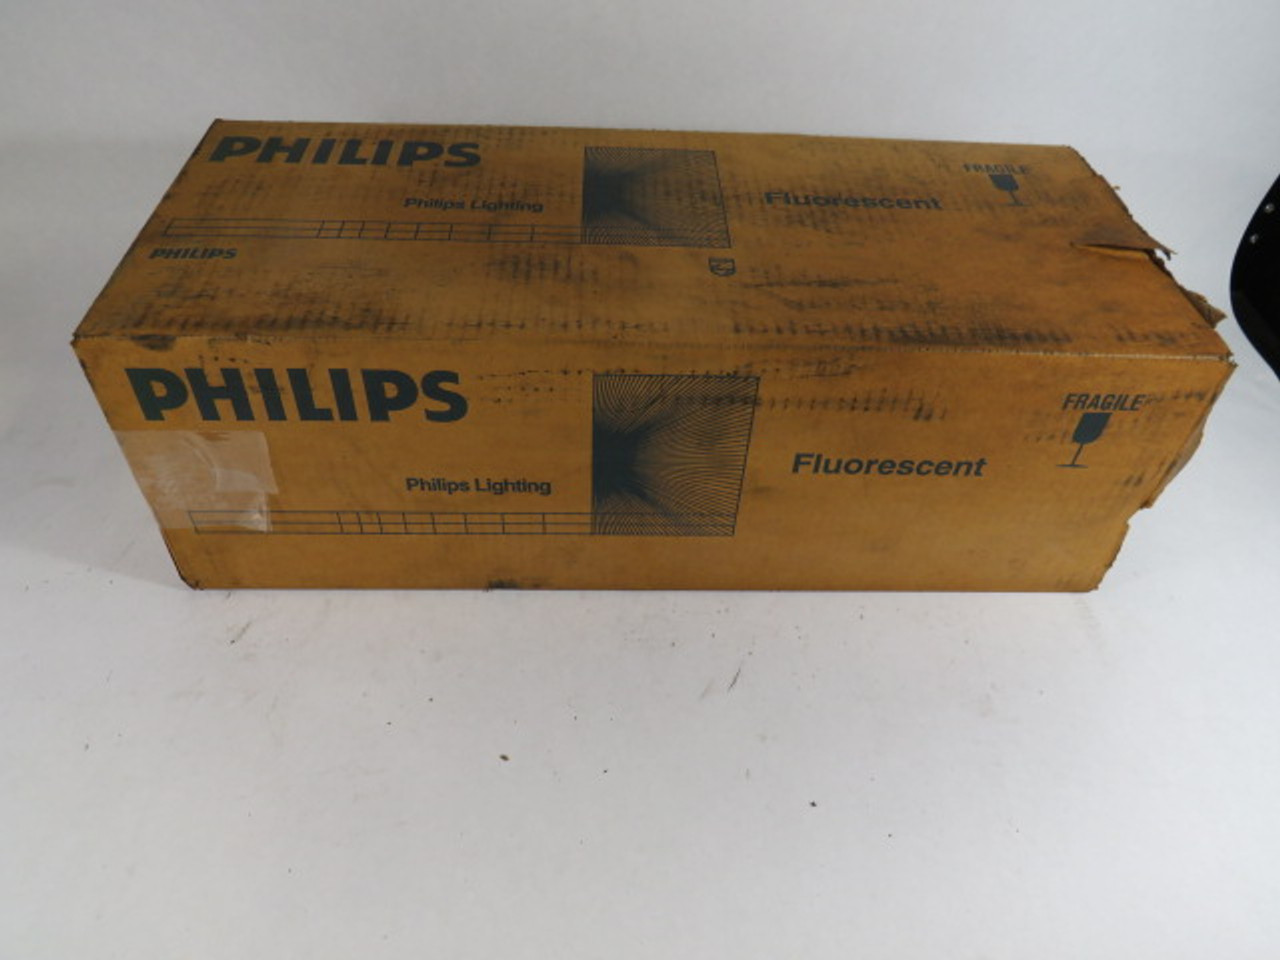 Phillips F20T12/CW 20W Fluorescent Tubes Pack of 6 ! NEW !